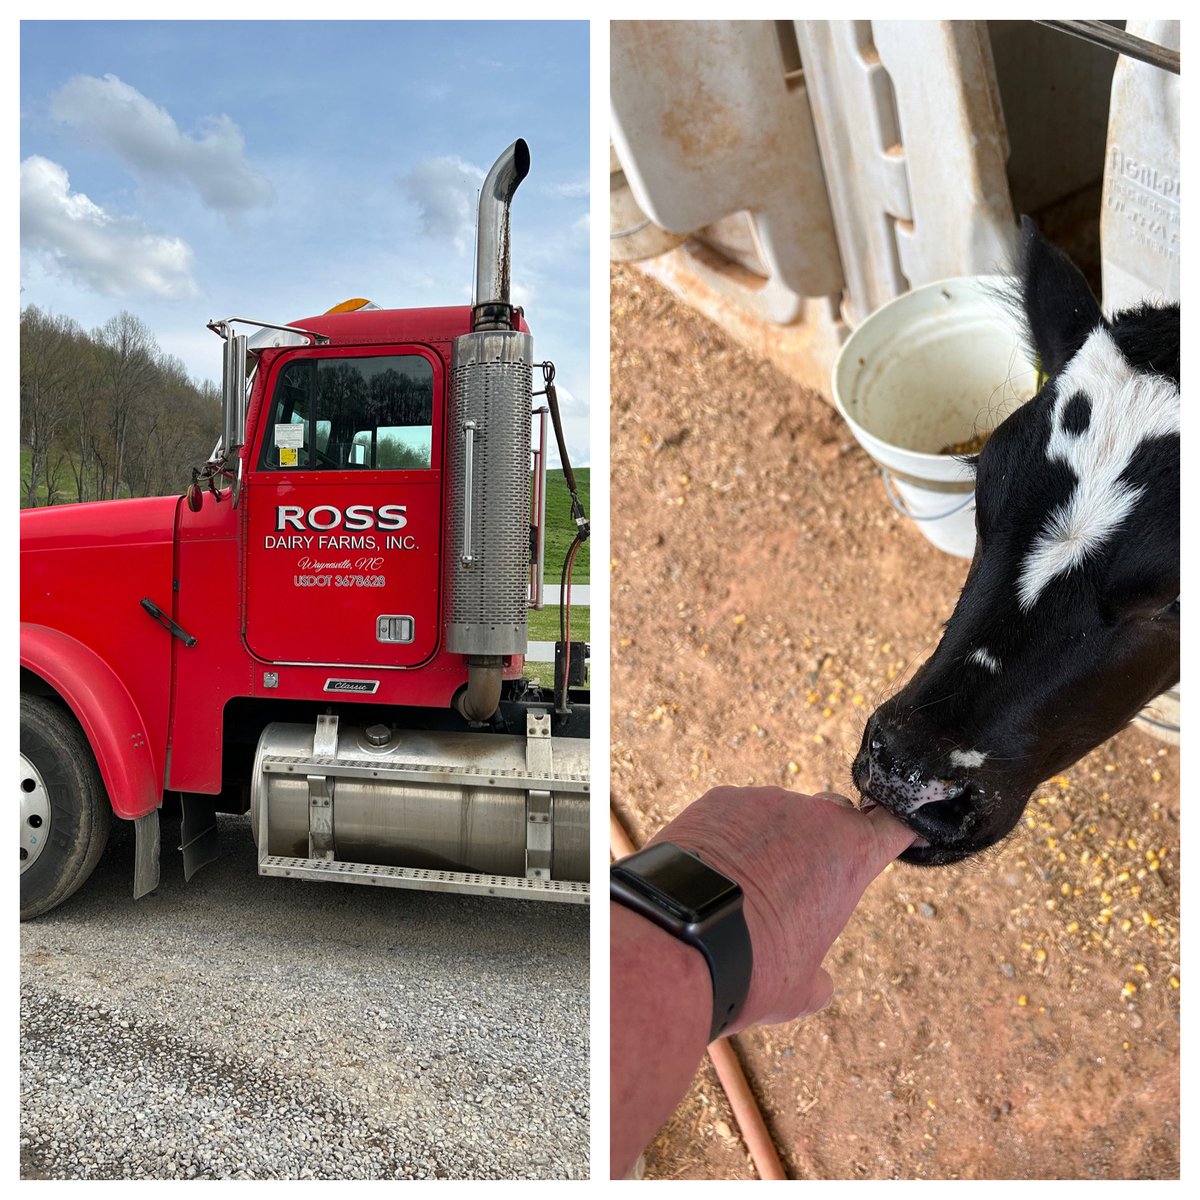 Anyone else get to visit a dairy farm 🐄 for work today?? #luckyme #NCFarmTour #undeniablydairy @JacketsLSHS @LCSJackets @CityCte @NCFCSEd @CTEforNC